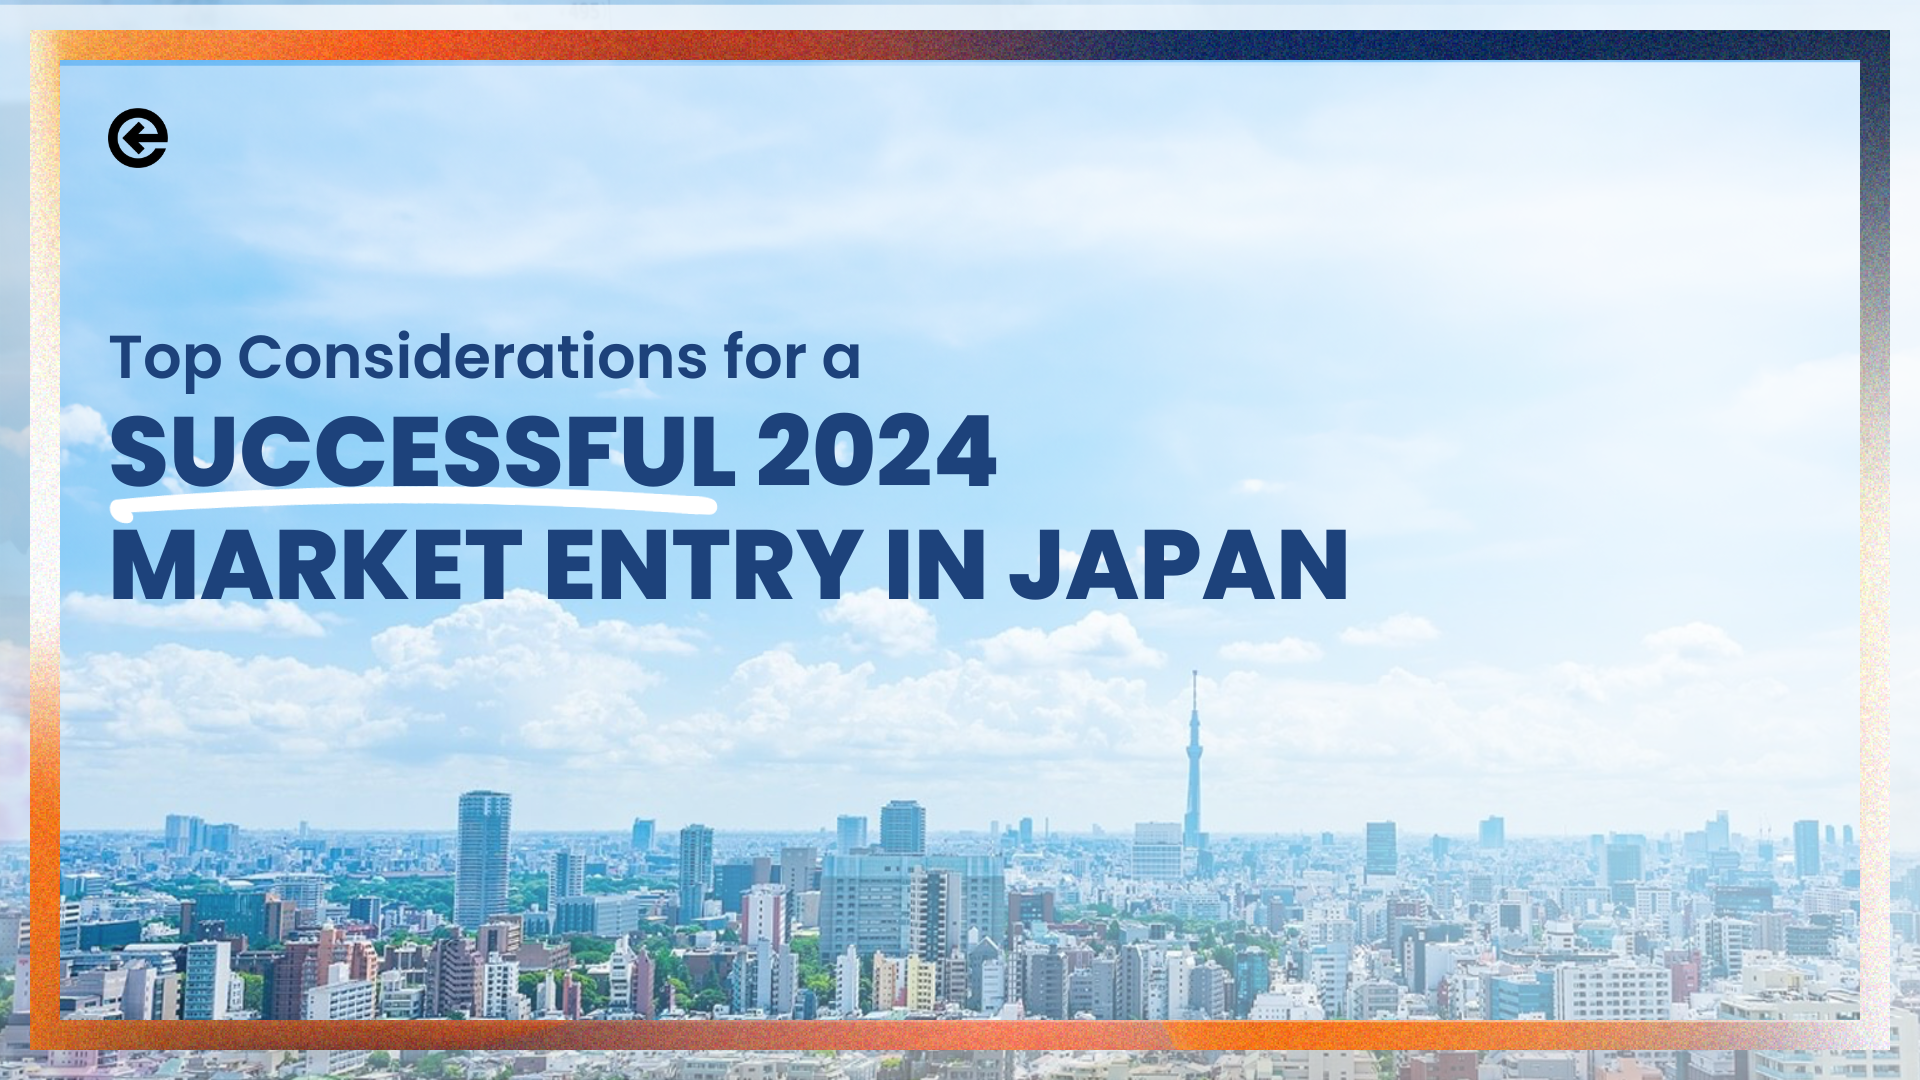 Top Considerations for a Successful 2024 Market Entry in Japan